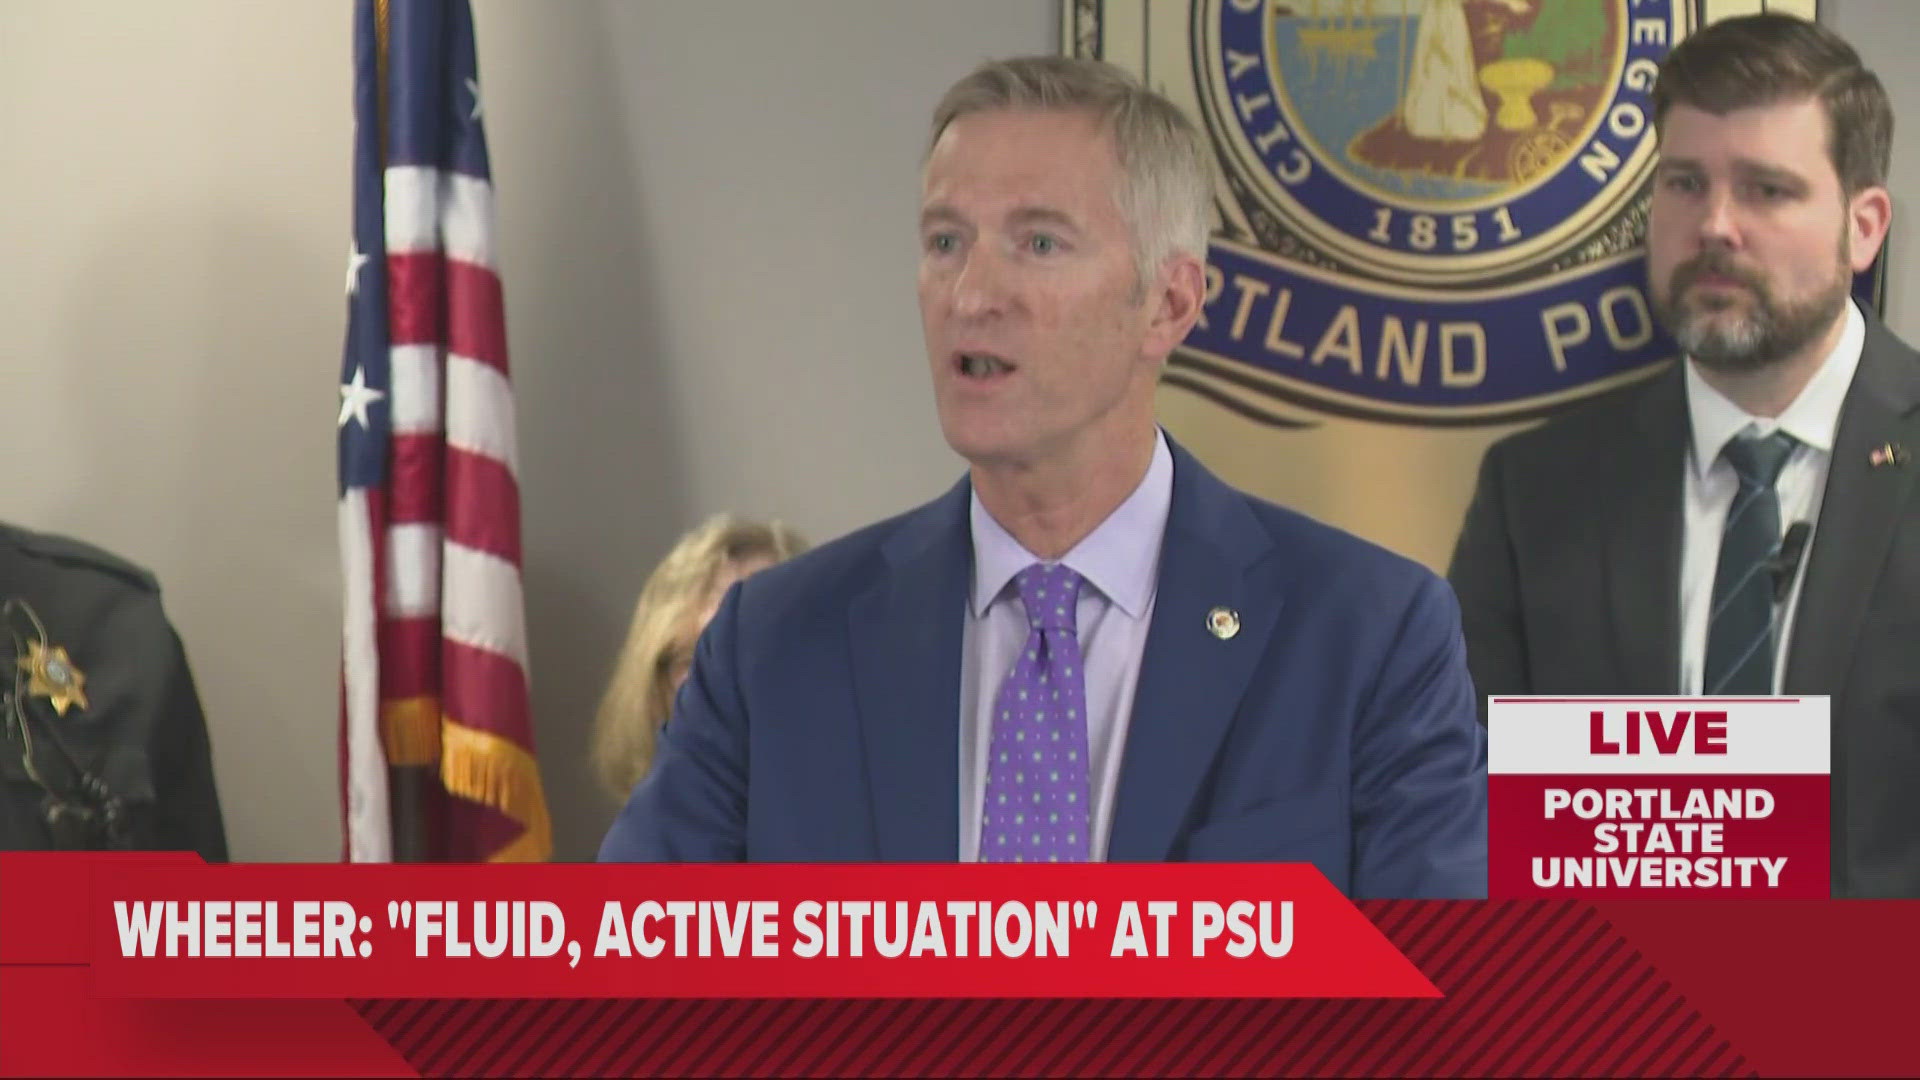 At a press conference, Portland Mayor Ted Wheeler said any protesters accountable for property damage will be prosecuted to the "fullest extent of the law."